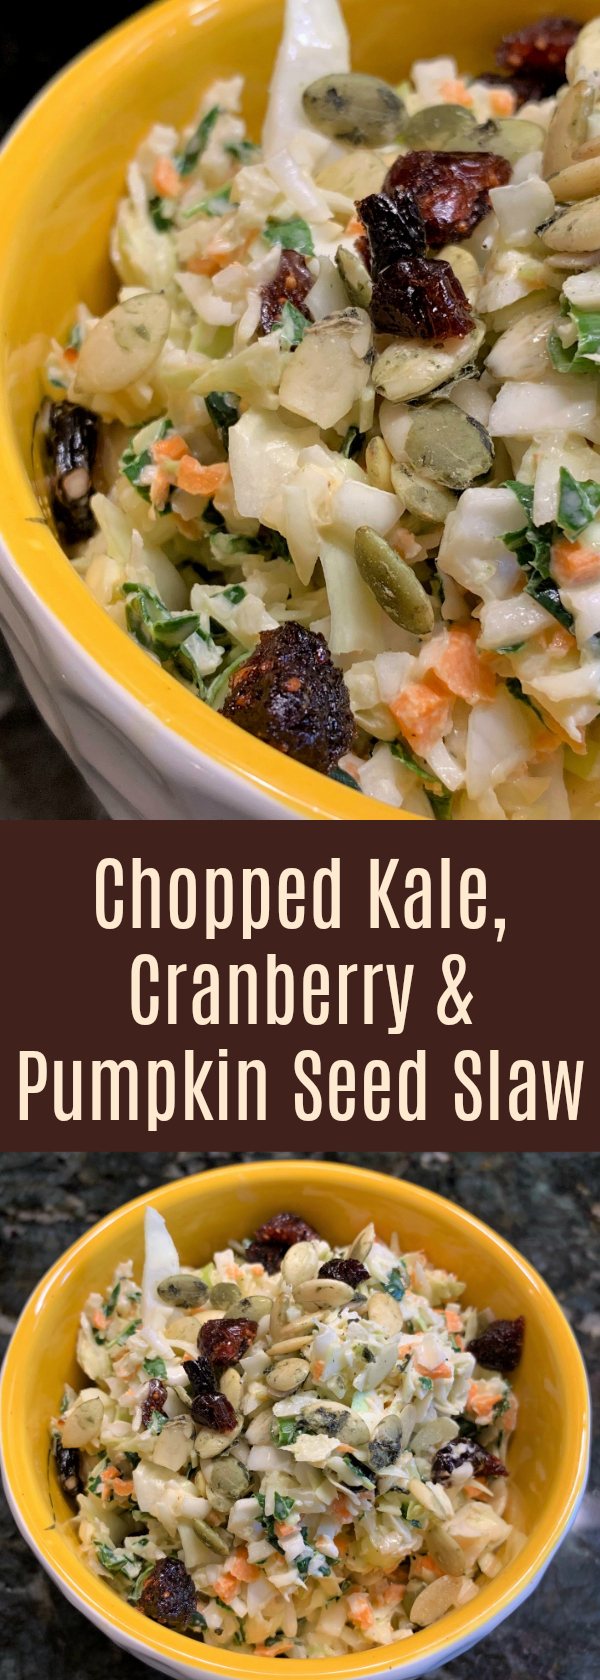 Chopped Kale, Cranberry and Pumpkin Seed Slaw, Gluten and Dairy Free